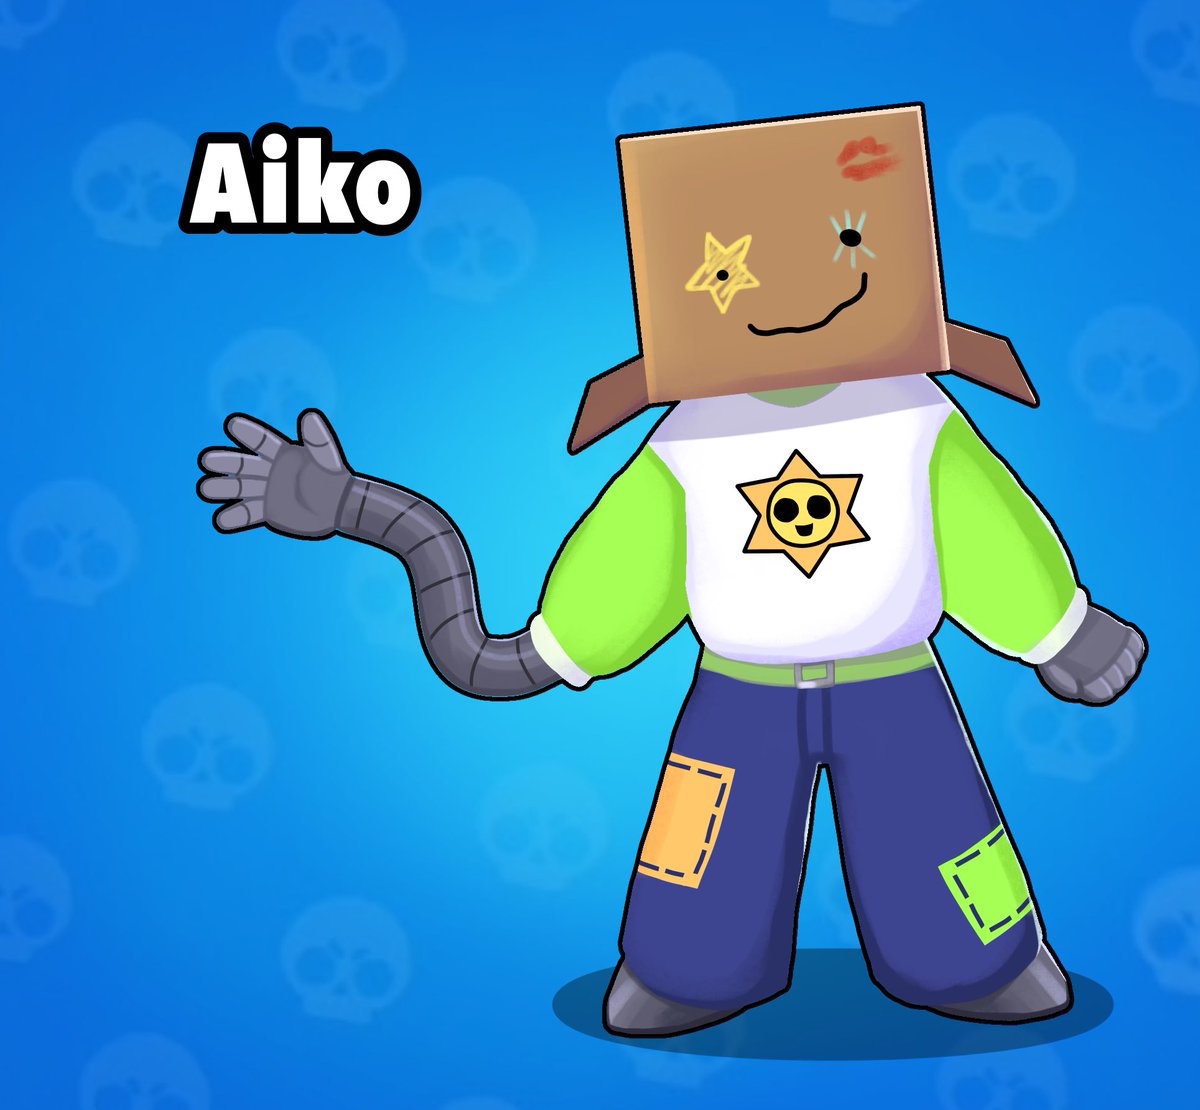 meet my fan brawler Aiko!! Aiko - is a robot who is trying to become human, she wears a box to hide her face, her whole body can be stretched! (i didn't create her attacks and etc, i don't have any ideas) #BrawlStarsArt #BrawlStars